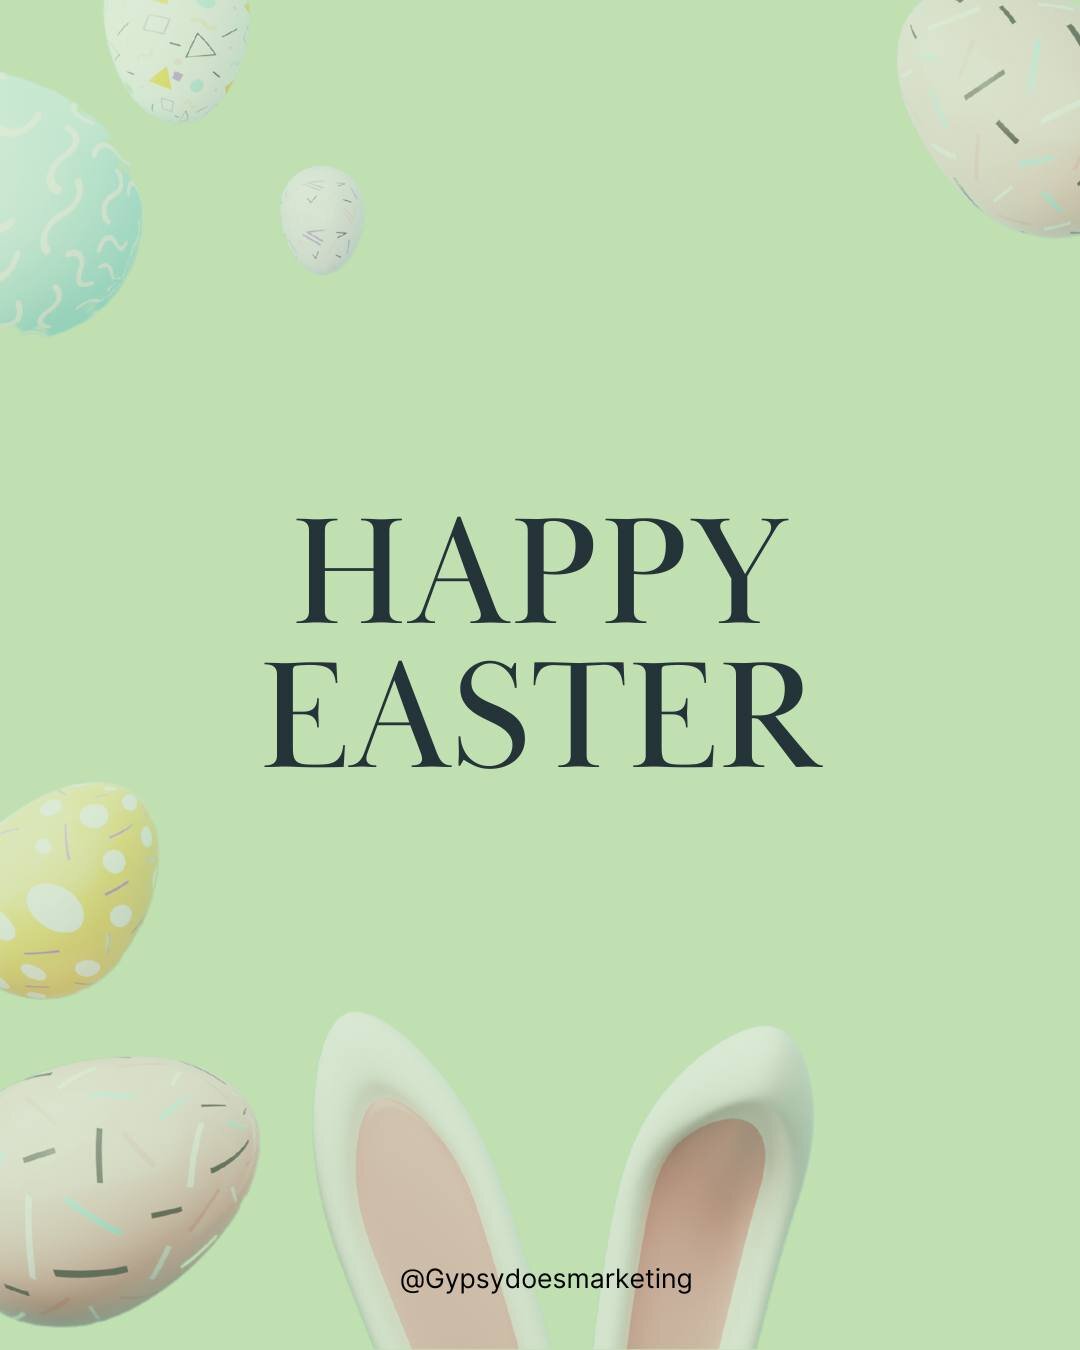 Happy Easter! 

Reminder that as a business owner you are also allowed to take the long weekend off. It's not always time to play catch up. It's time to rest and spend with those you love! 

Do something FUN! Your business will thank you when you com